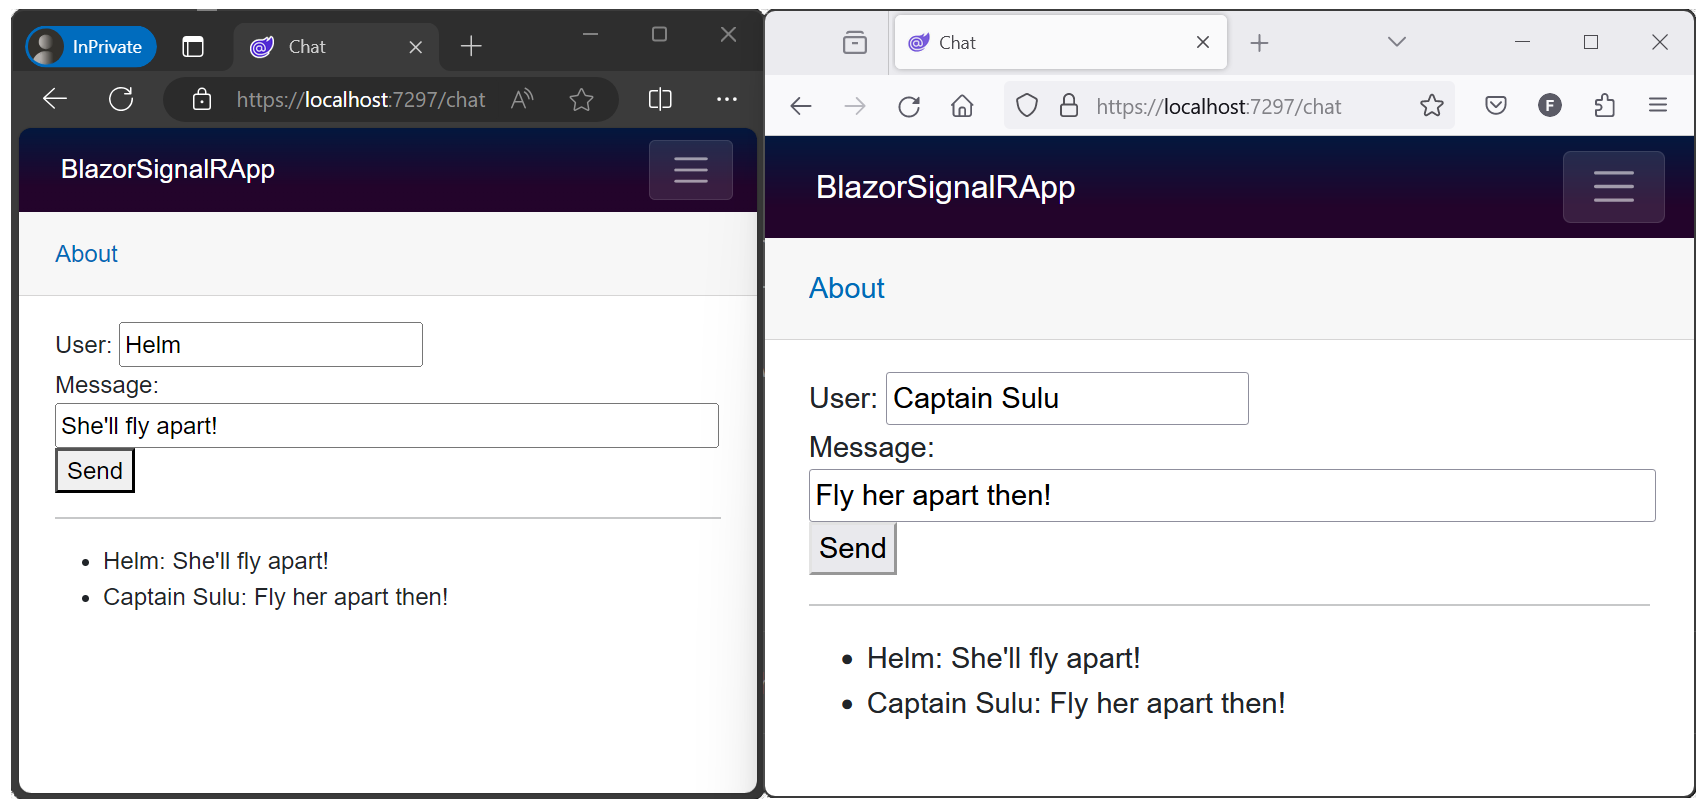 SignalR Blazor sample app open in two browser windows showing exchanged messages.